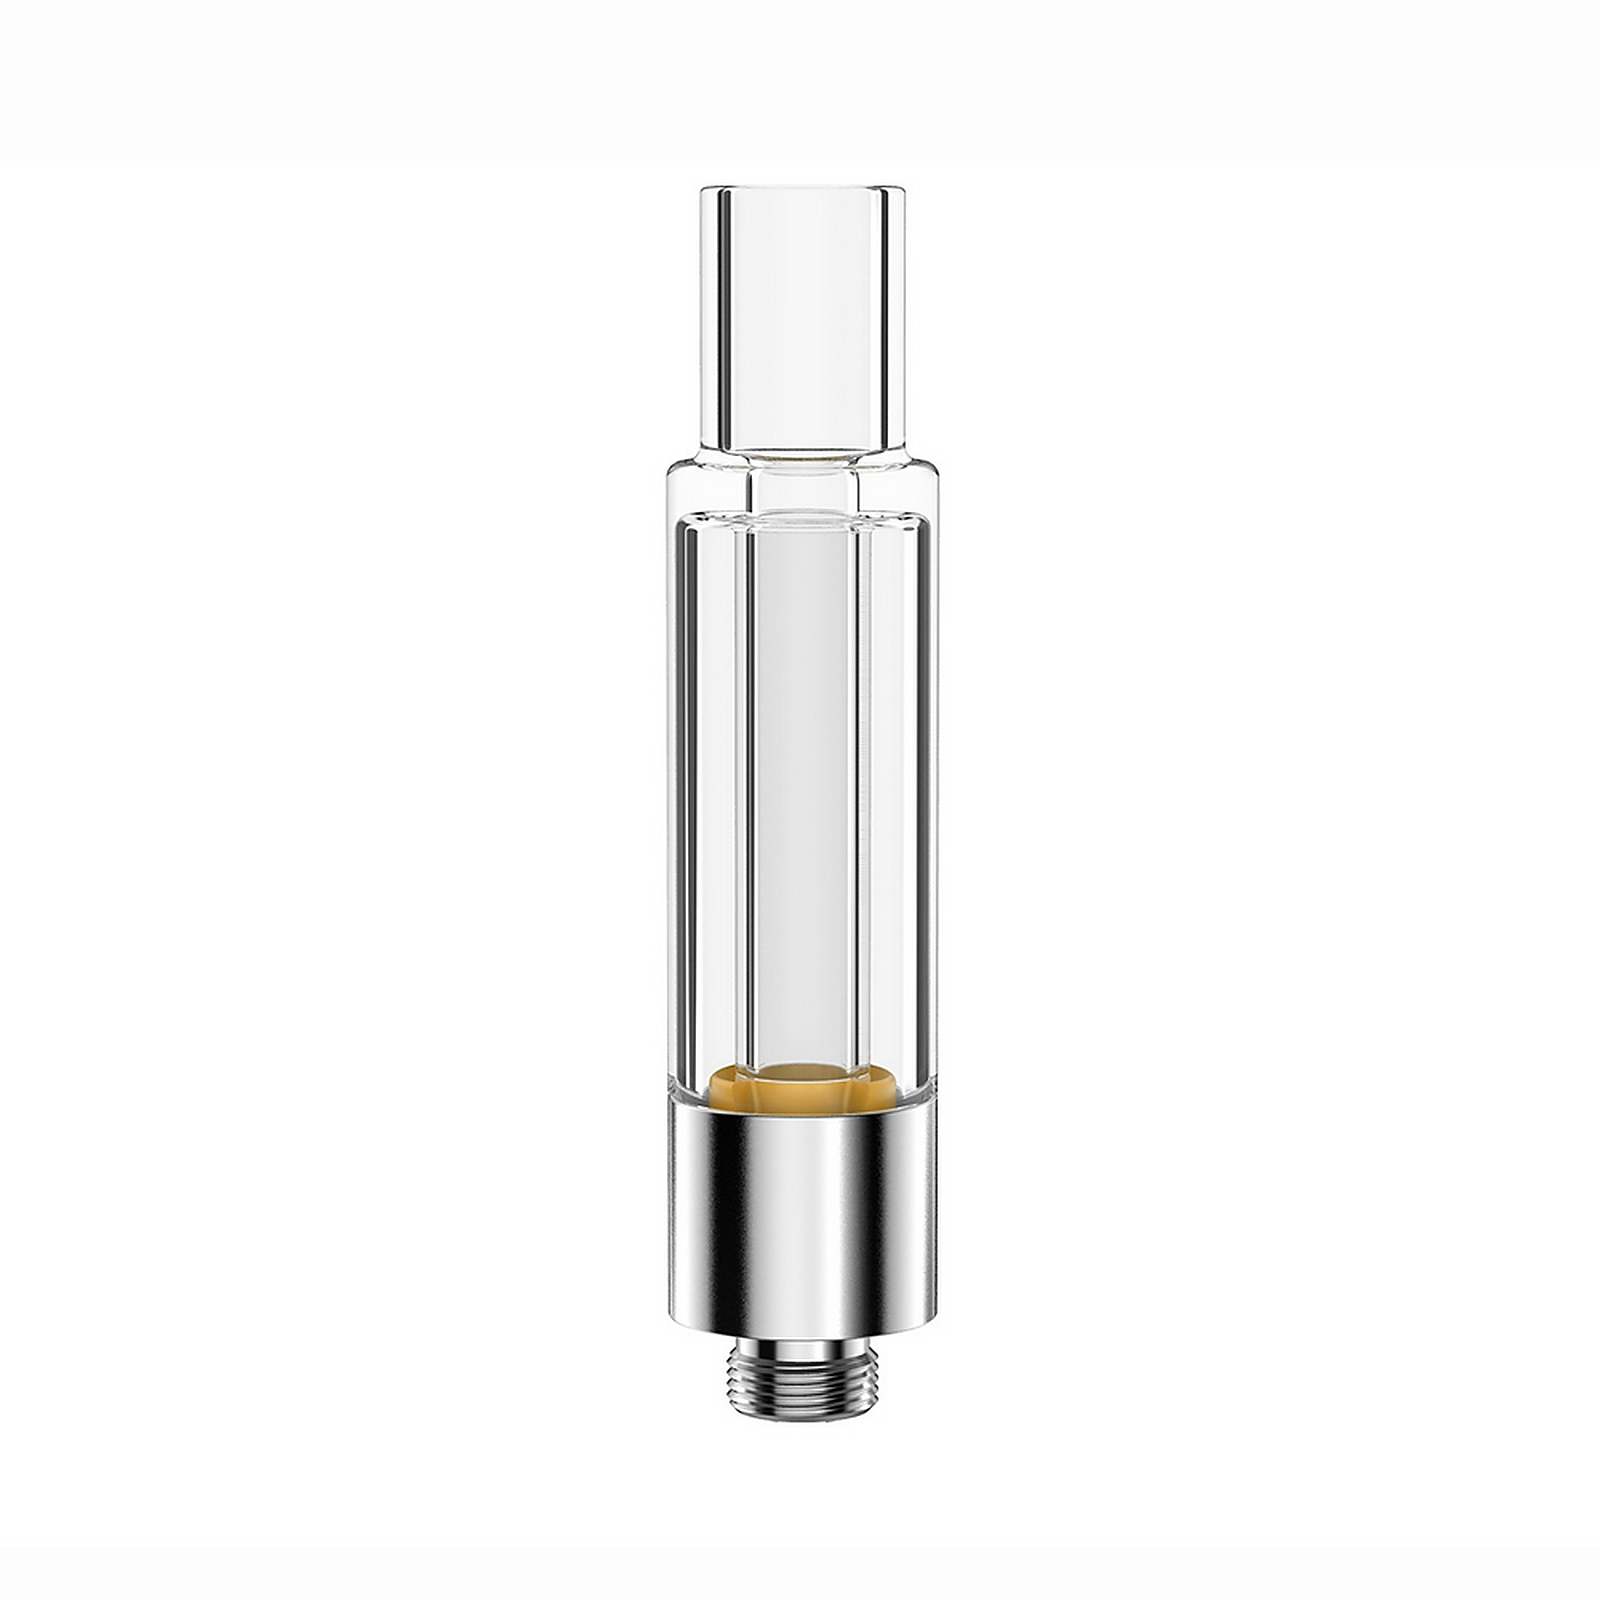 Simply Crafted Free Shipping Save 25 With Code Leafly Glass Vape Cartridge 1ml Leafly 2353